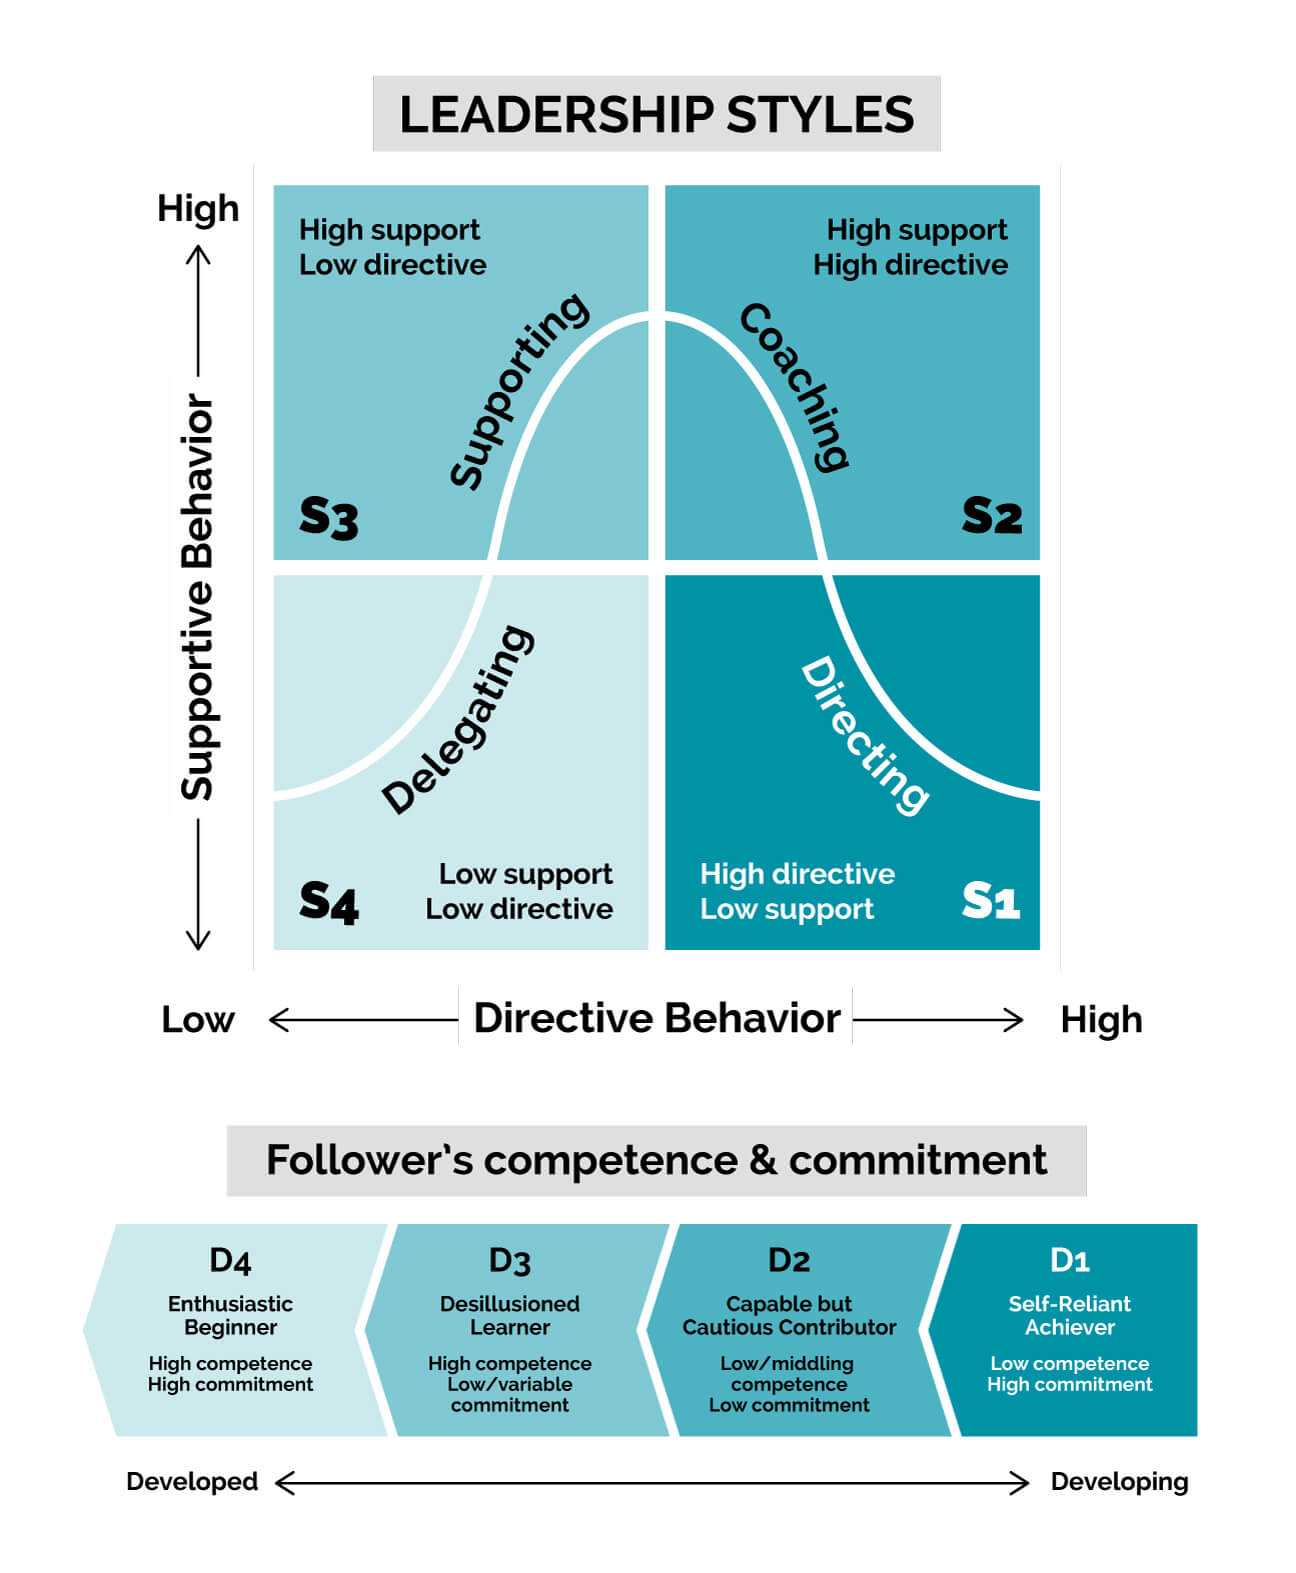 Situational Leadership framework designed by Blanchard and Hershey